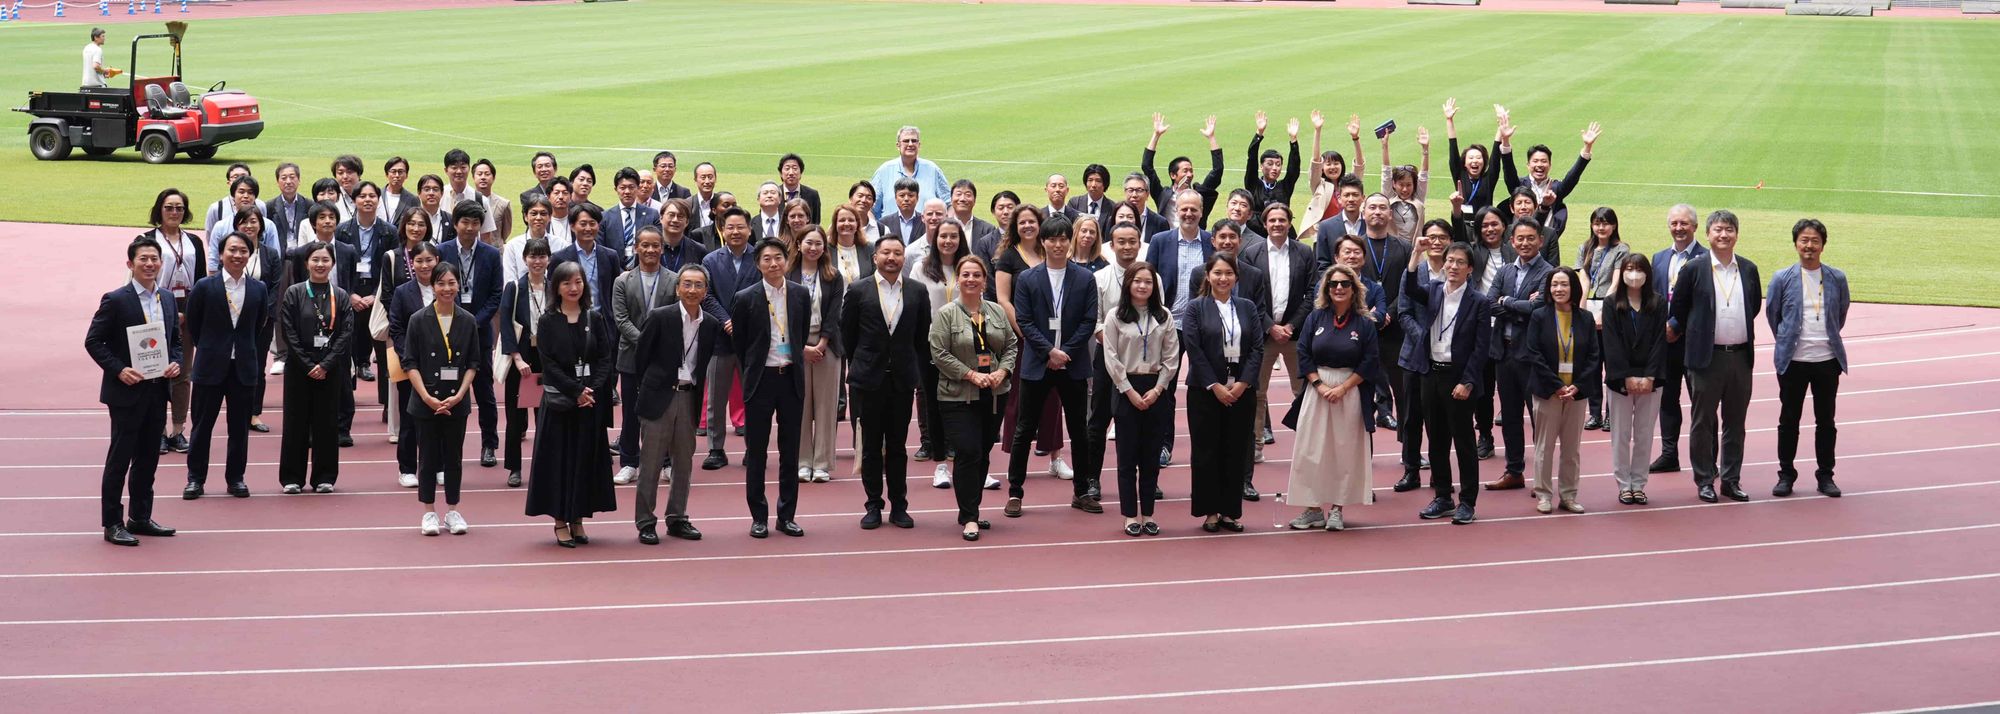 Tokyo 25 conducted the first Partners Workshop with the World Athletics from 21-24 May.